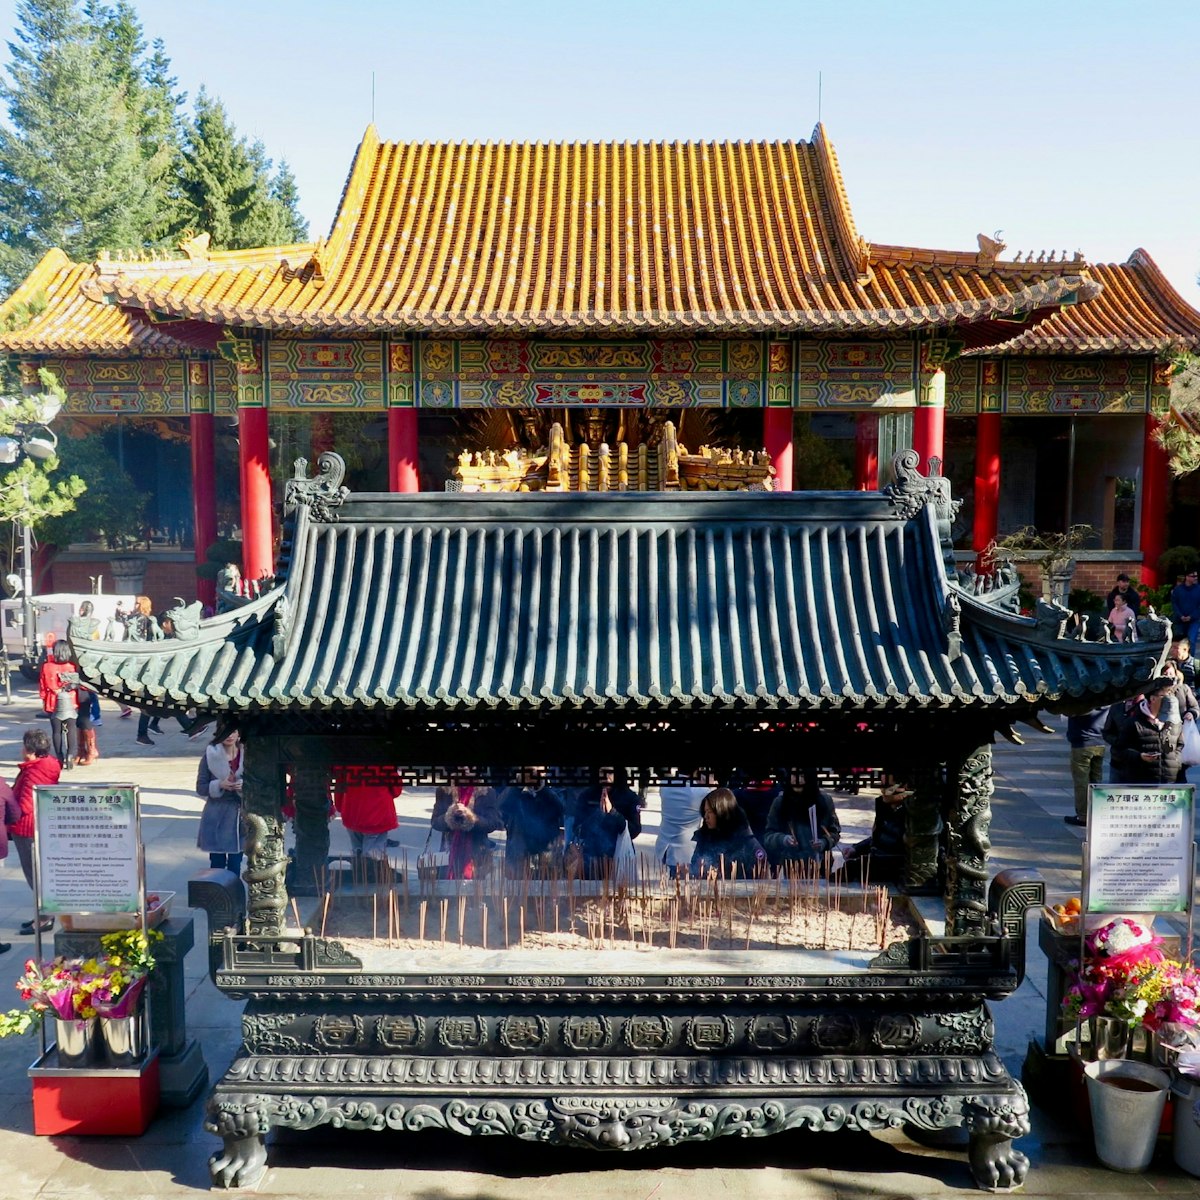 Exterior of the International Buddhist Temple